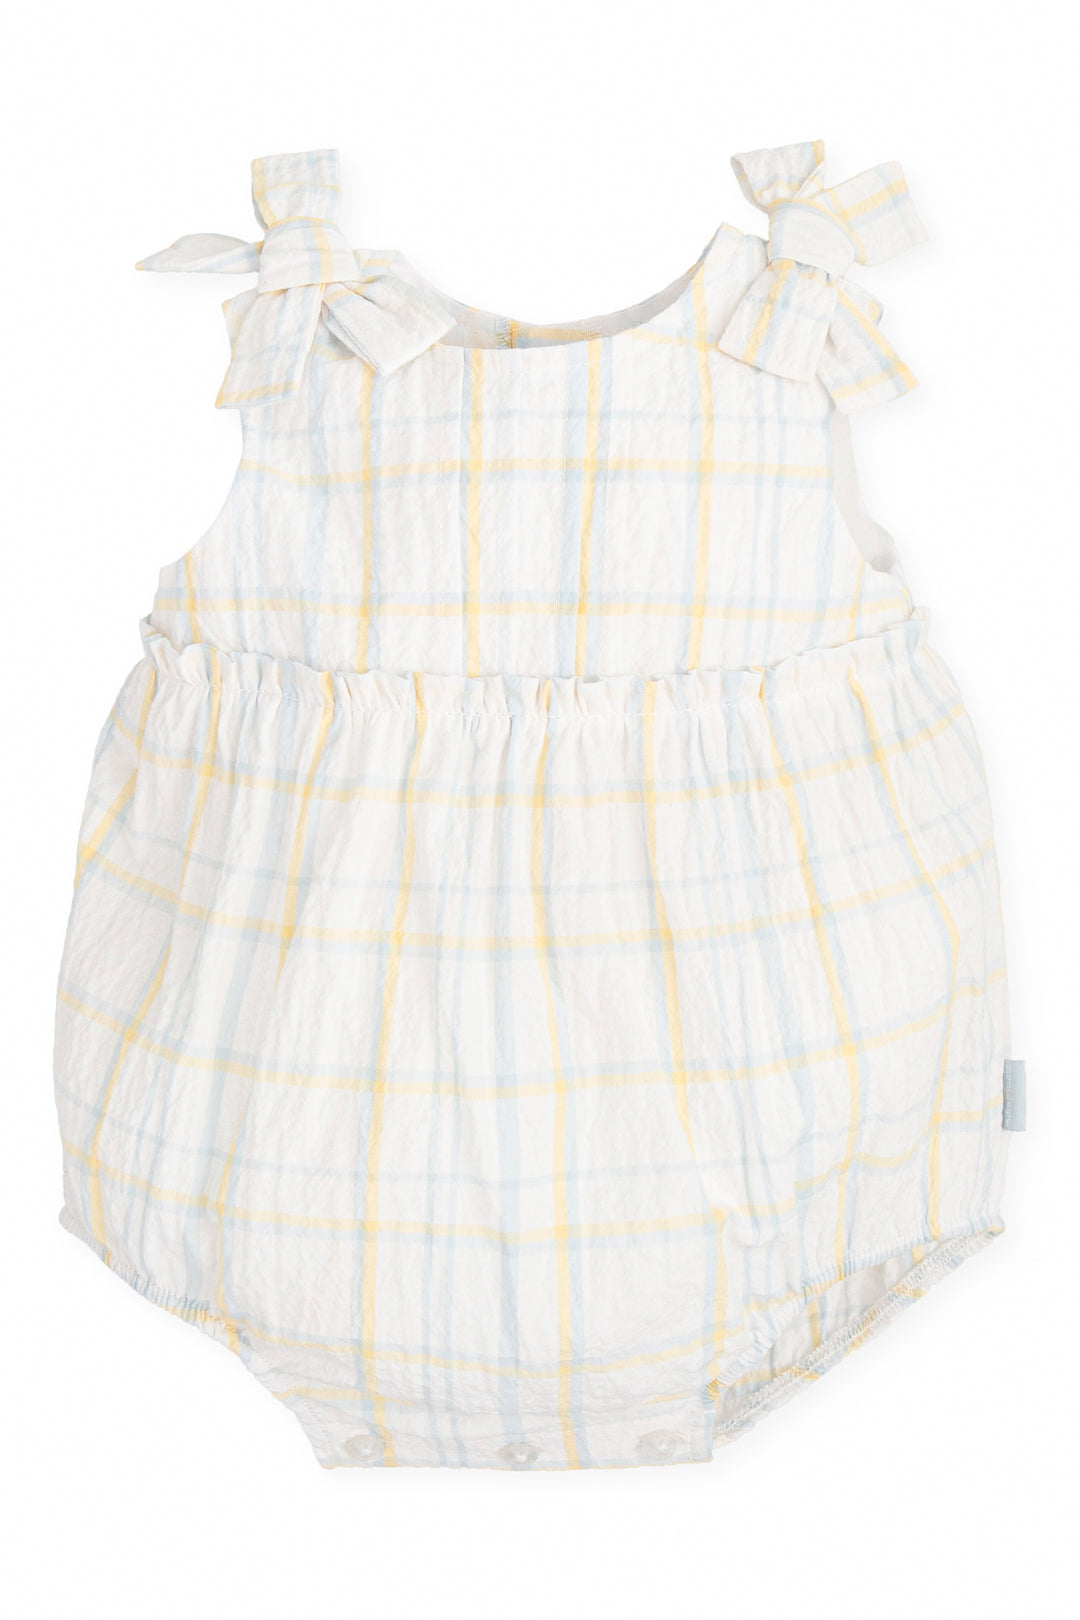 Tutto Piccolo "Poppy" Lemon Checked Romper | iphoneandroidapplications